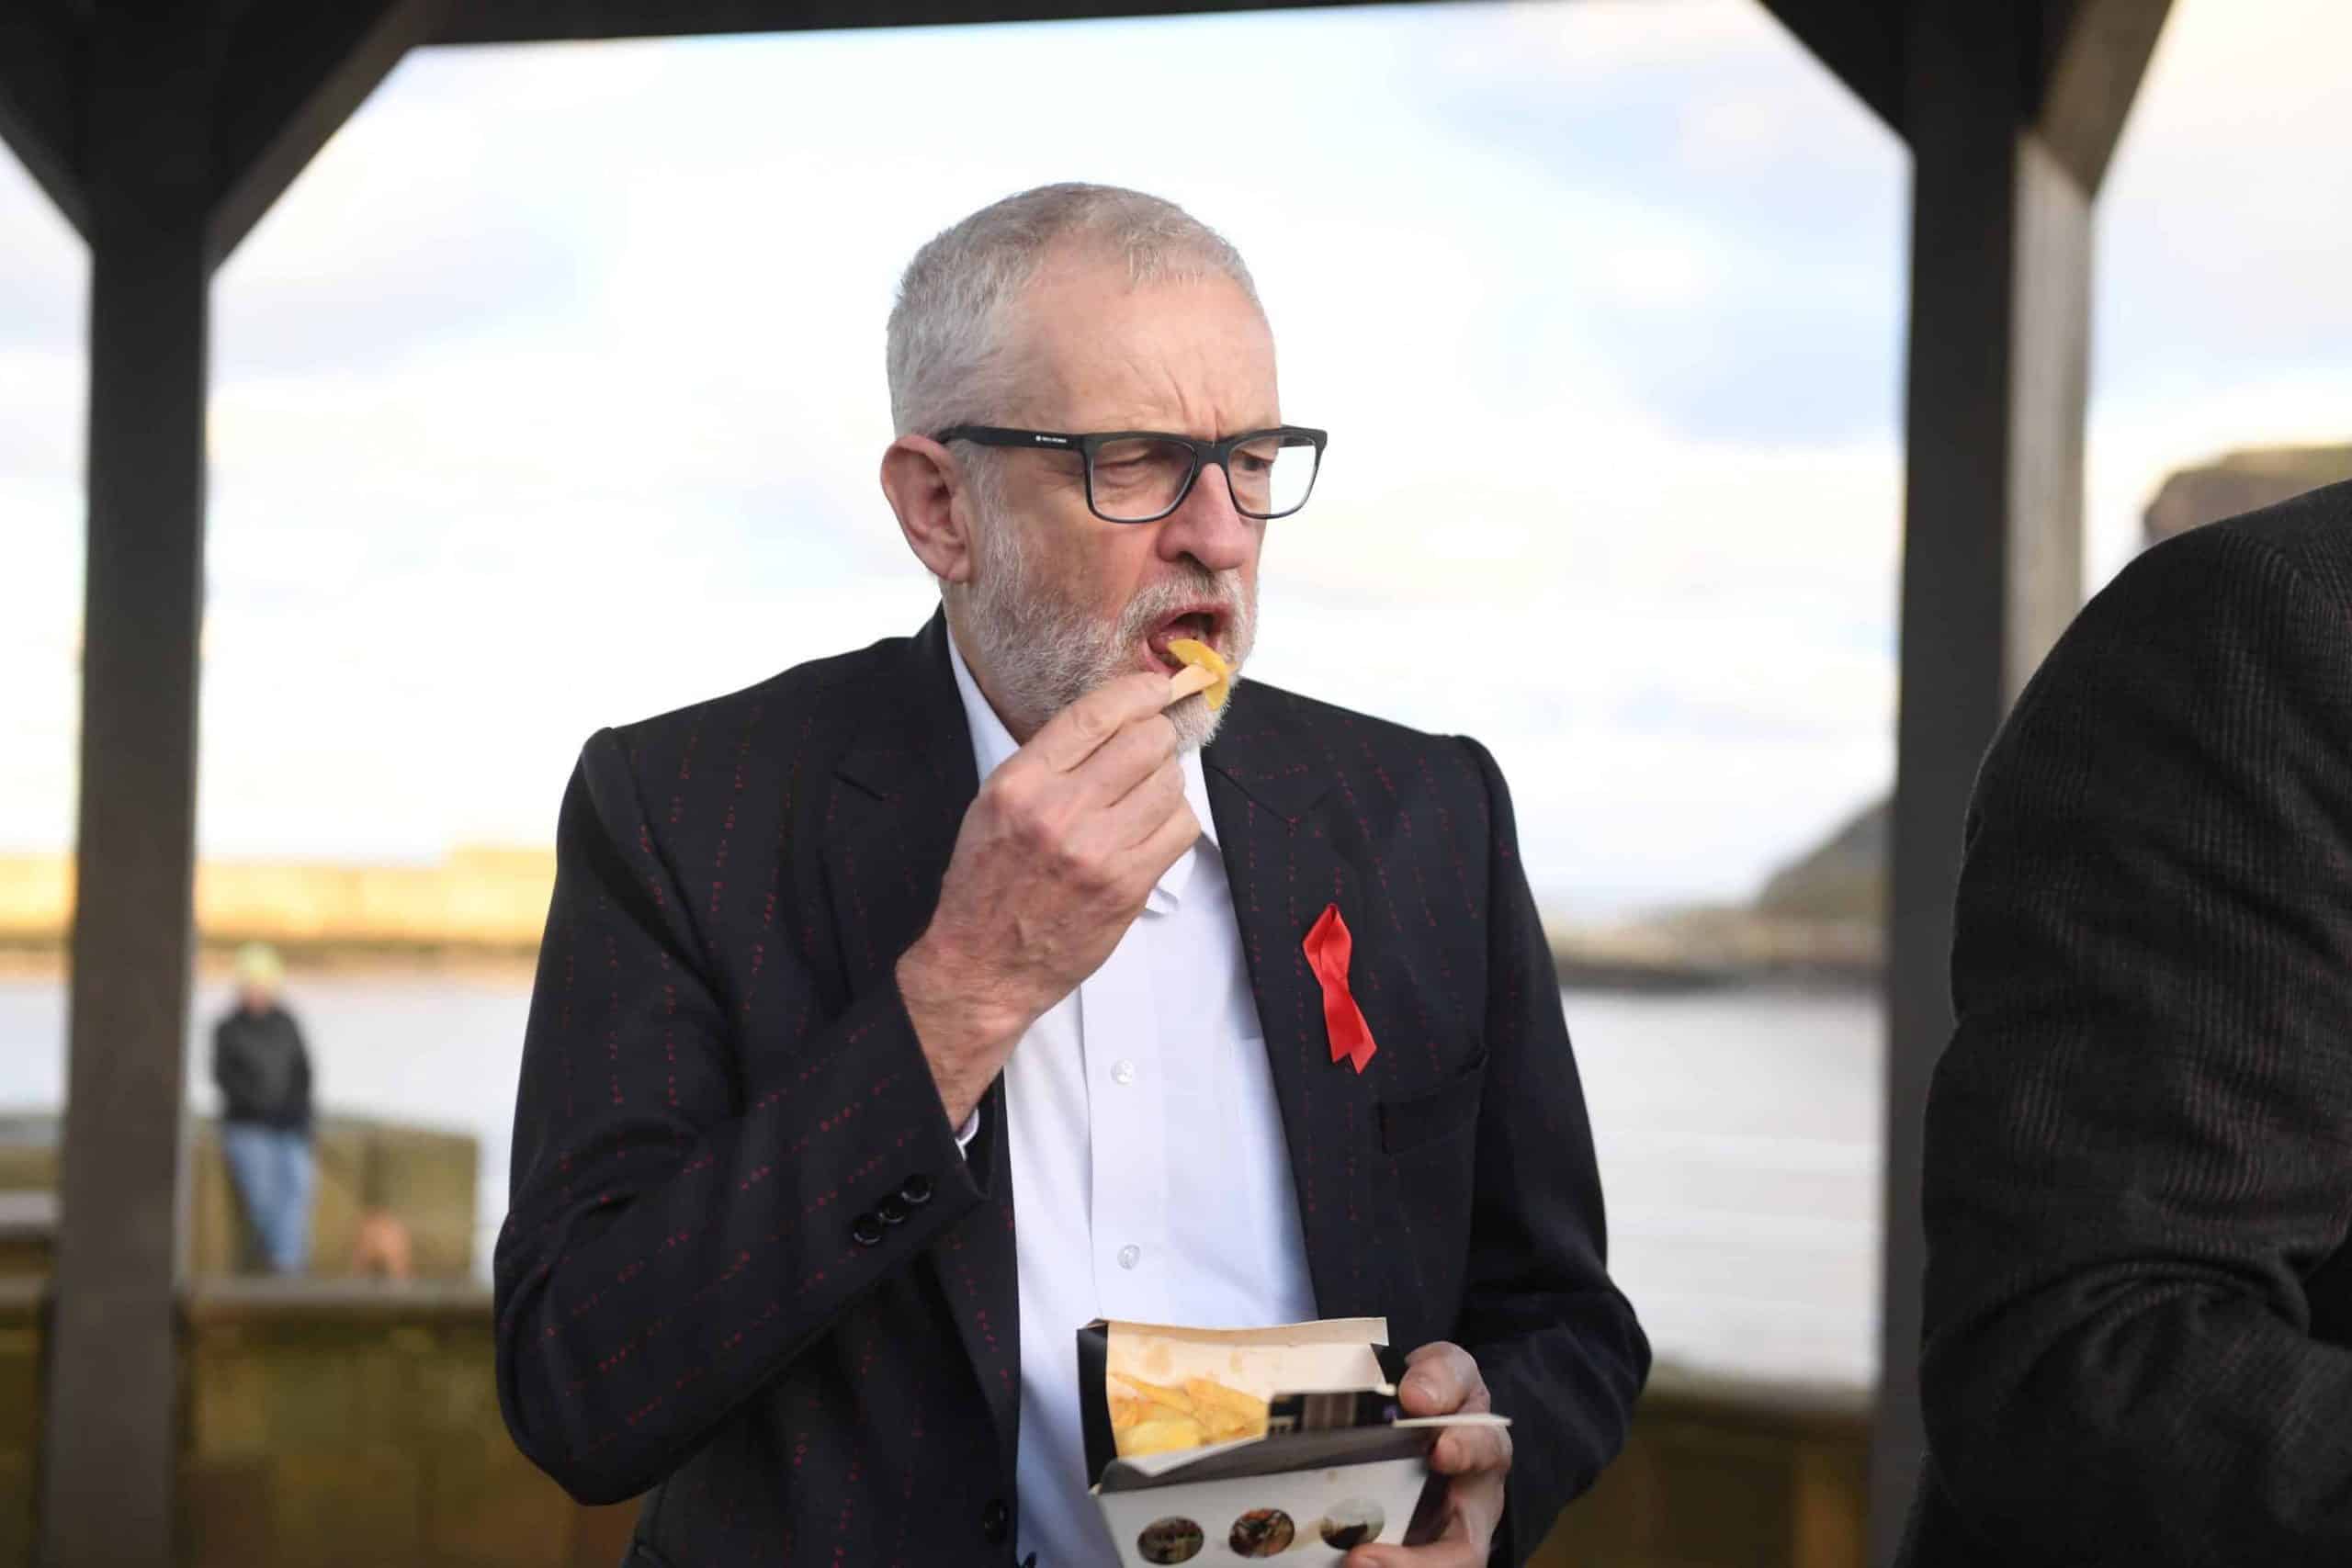 Corbyn hits campaign trail in ‘for the many not the few’ suit jacket